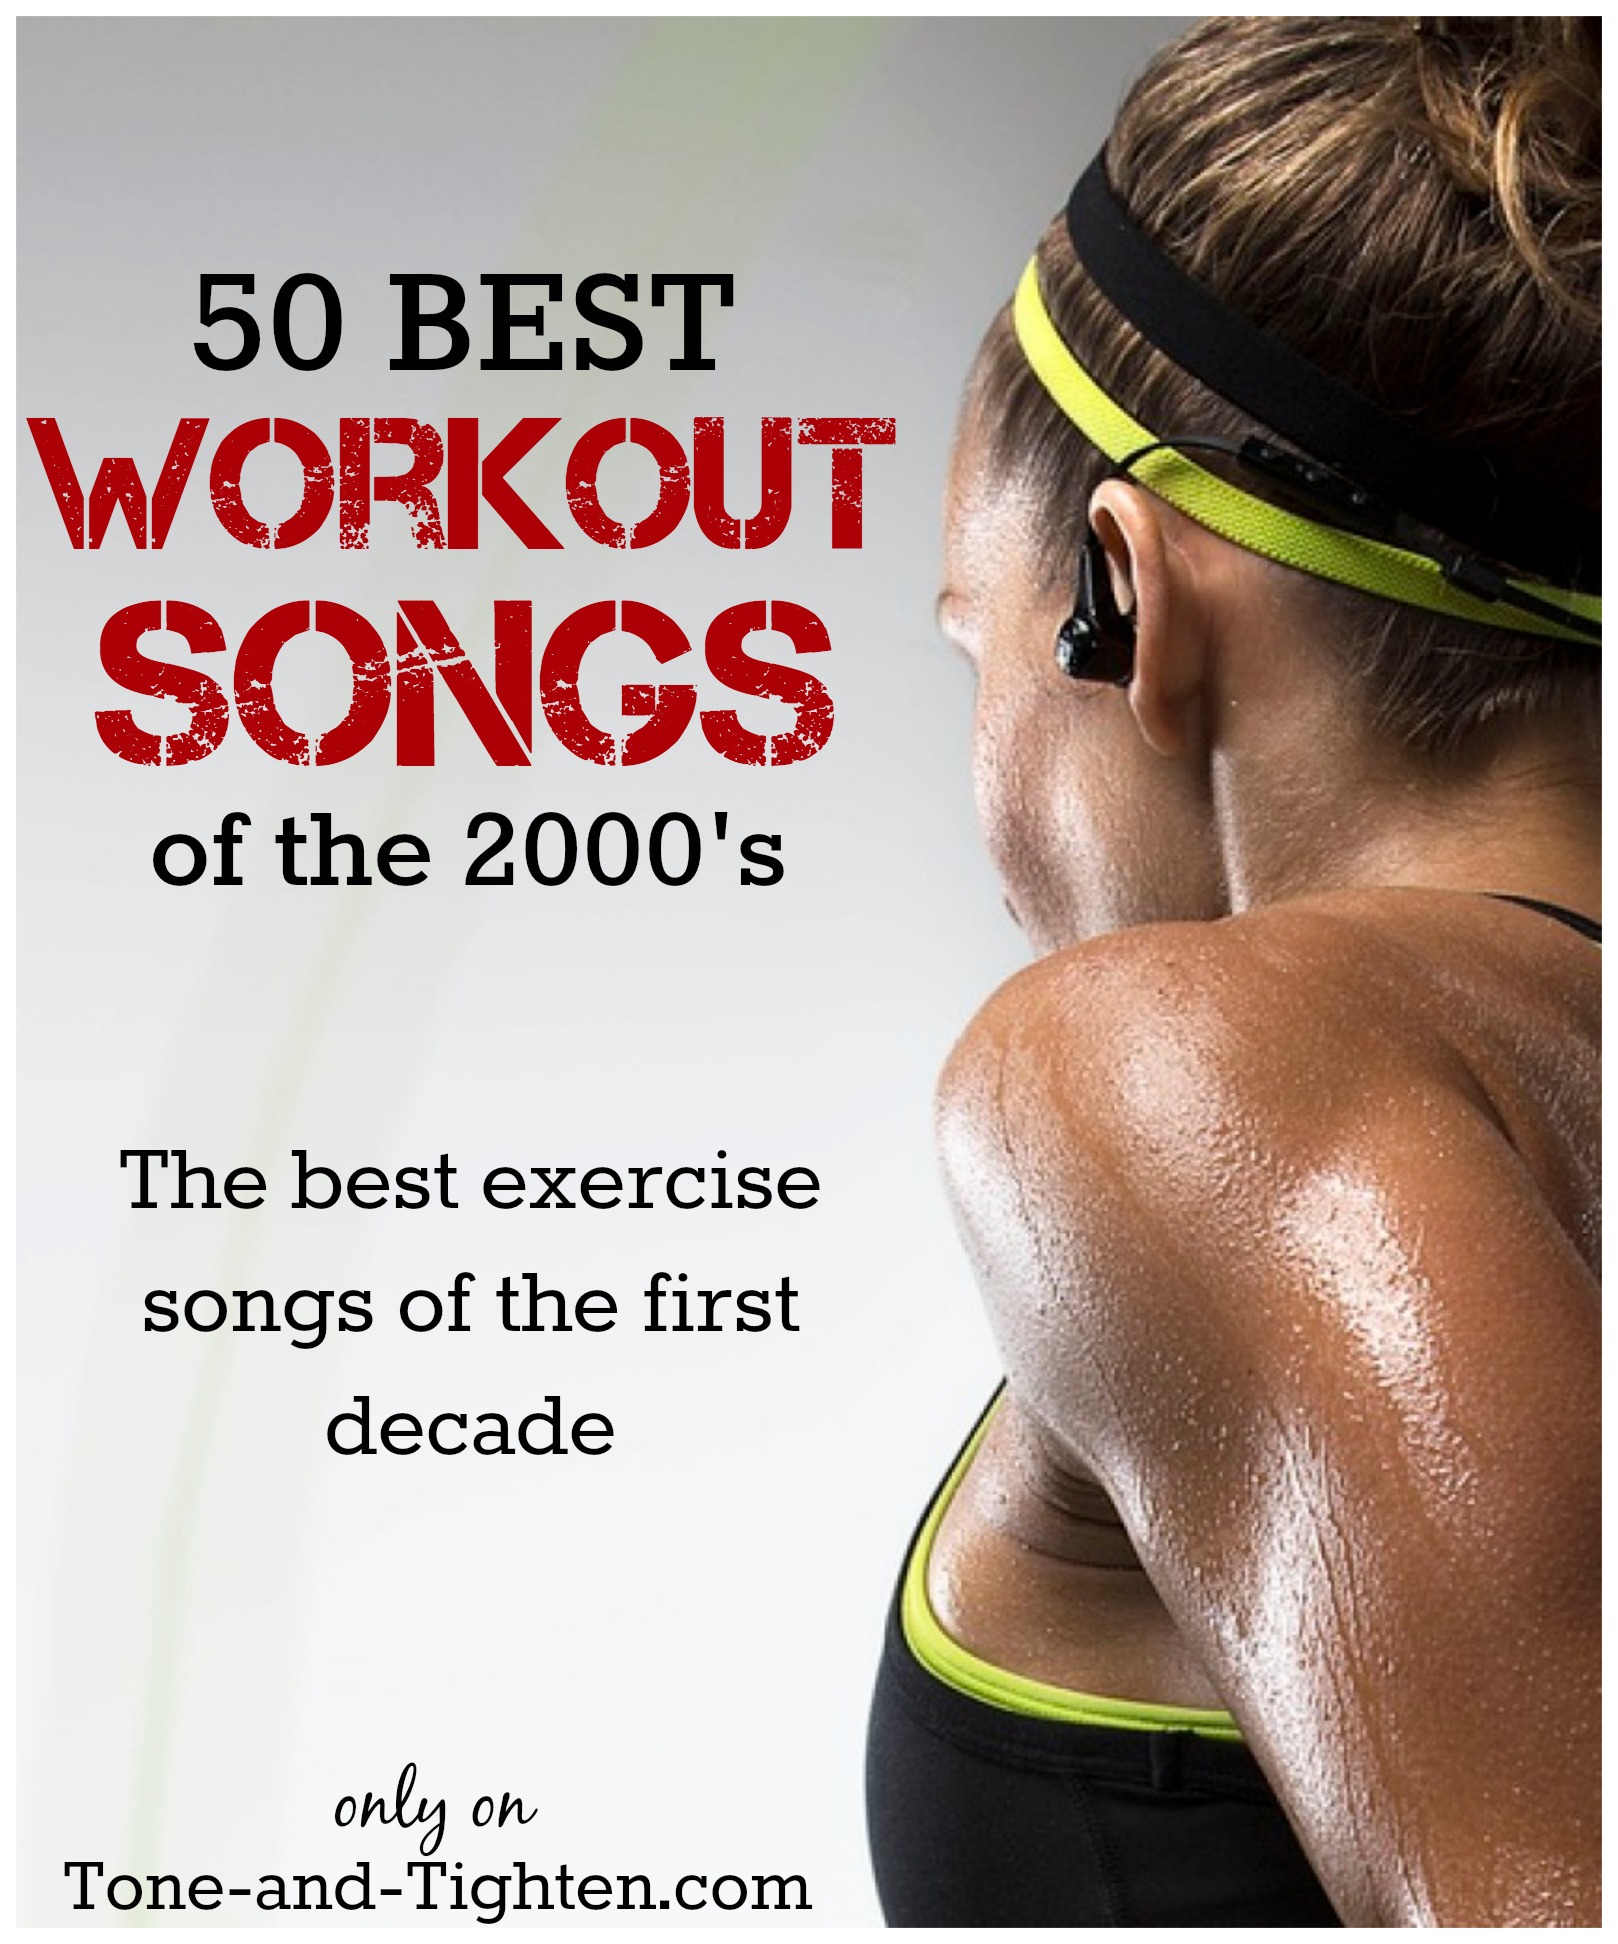 Best Workout Songs of the 2000’s – Great playlist for your next workout